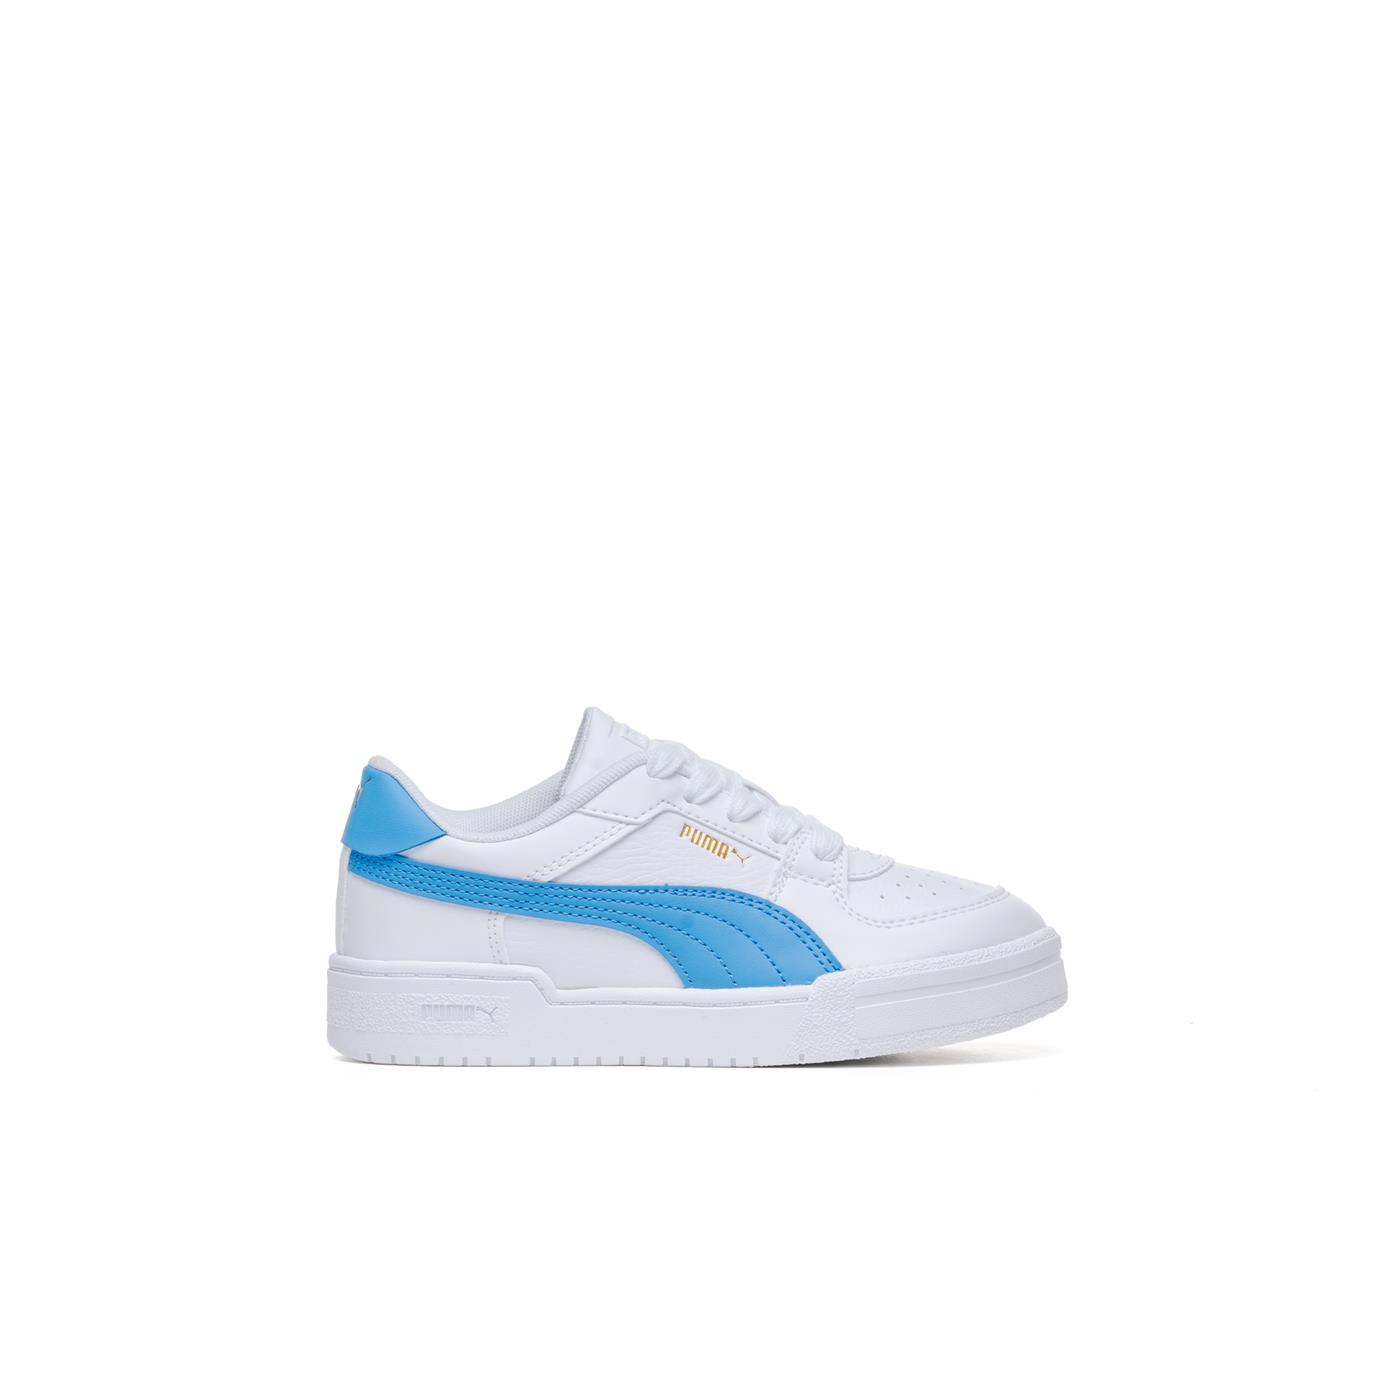 RvceShops | Sneakers PUMA CA | Child mujer Puma PS Classic 16 amarillas White 382278 sneakers - Pro | for